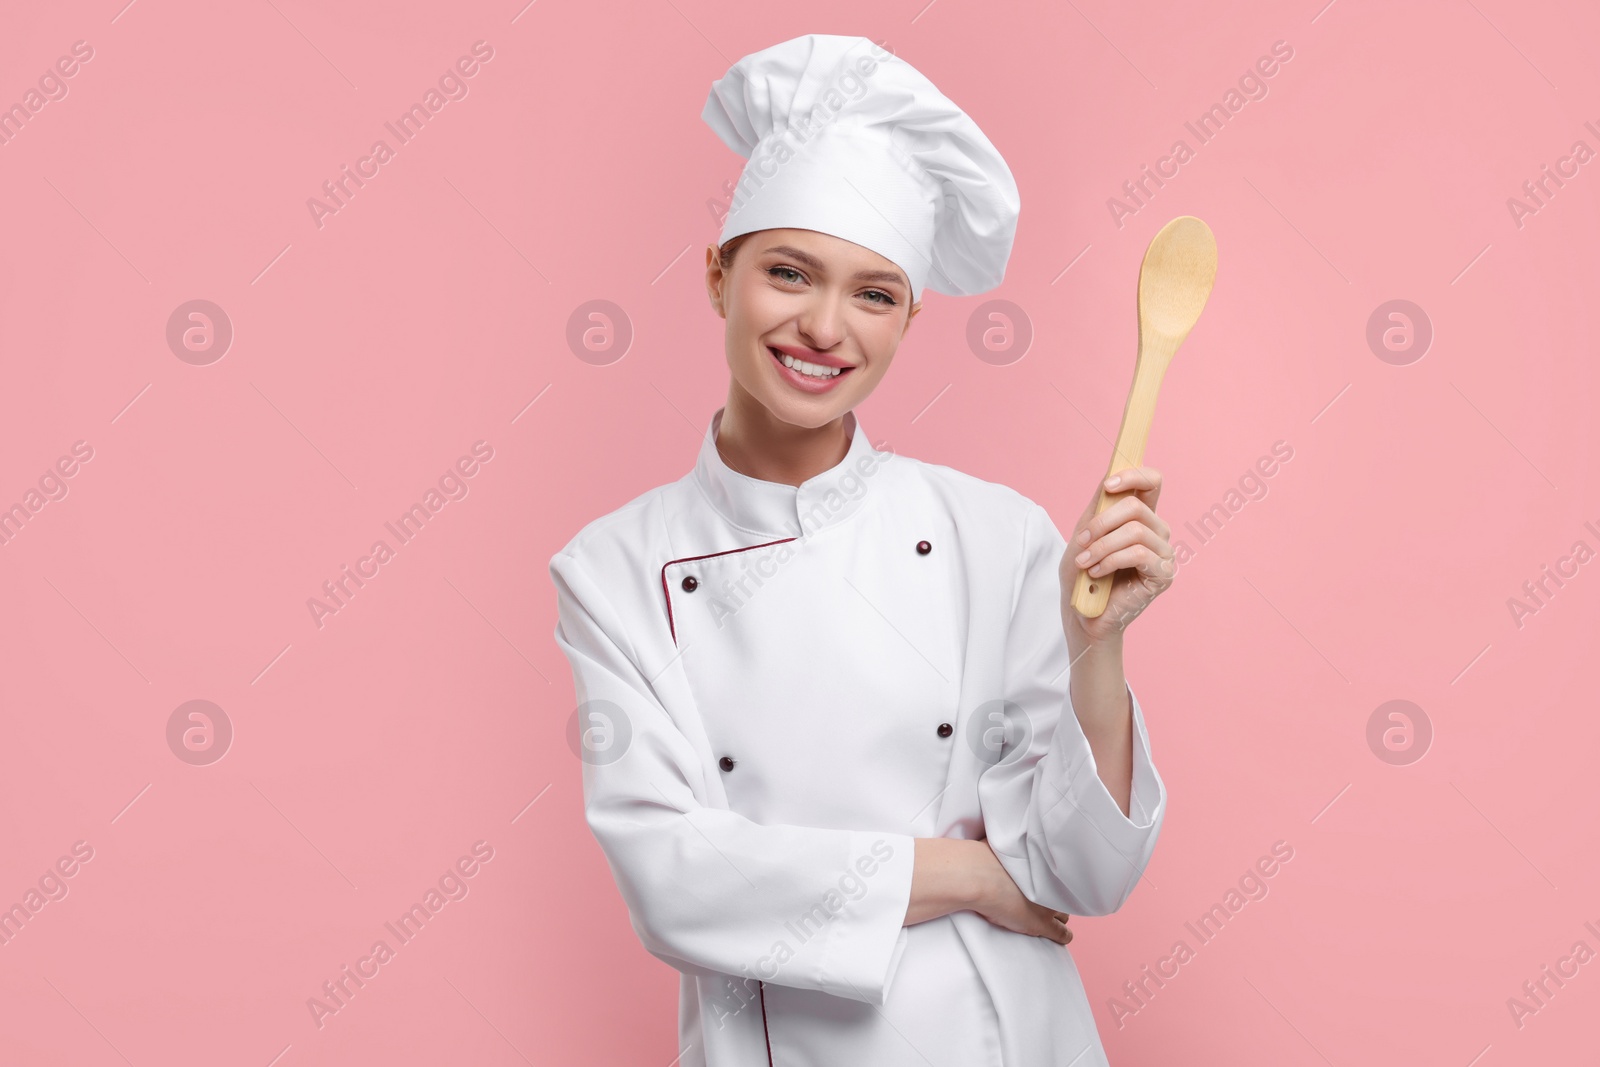 Photo of Happy chef in uniform holding wooden spoon on pink background